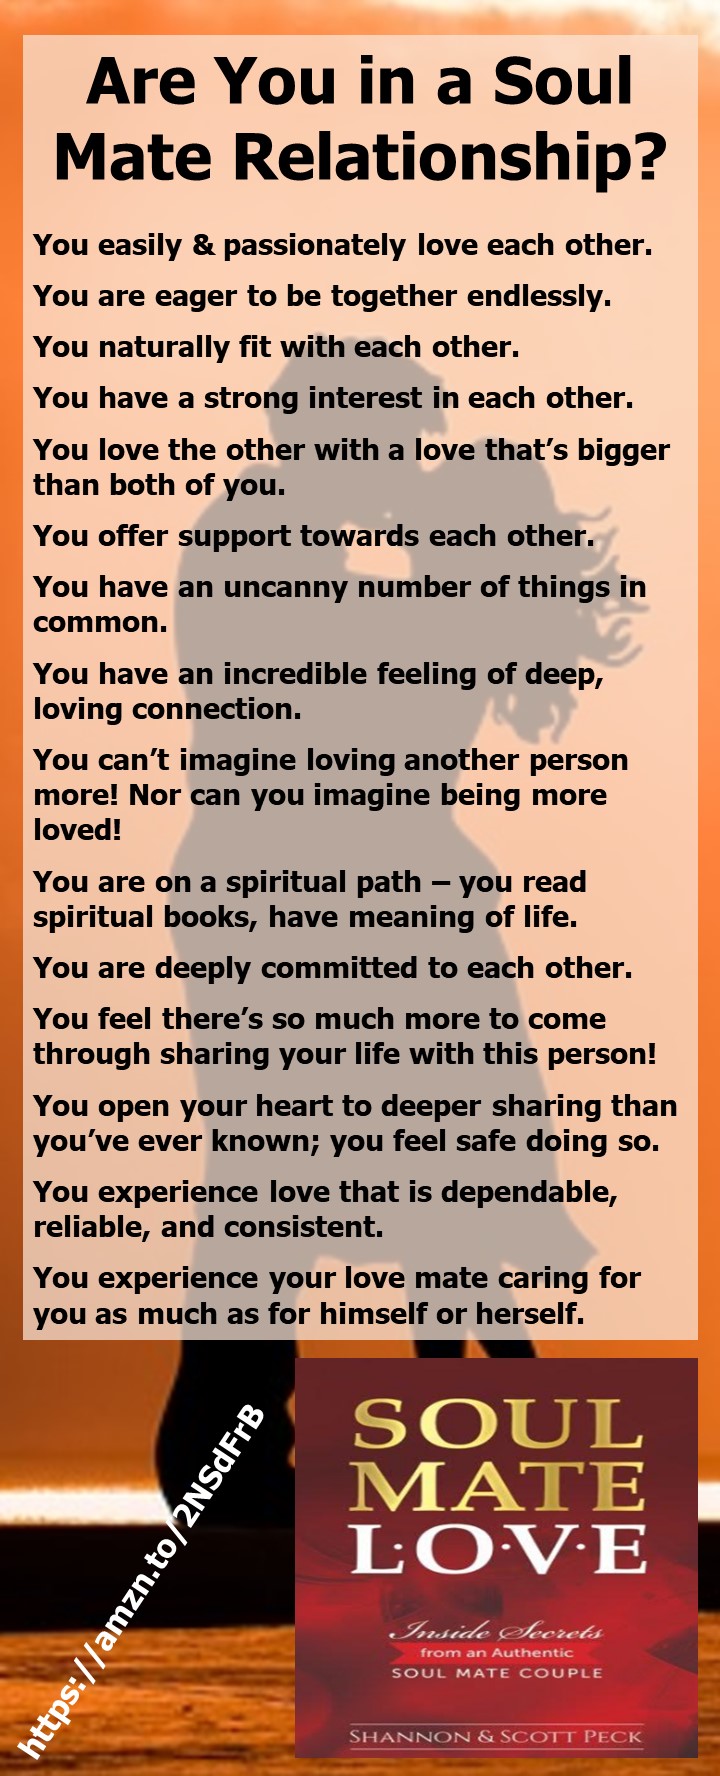 Soul Mate Love: Inside Secrets from an Authentic Soul Mate Couple by Shannon and Scott Peck - 15 Ways to Recognize if You're in a Soul Mate Relationship